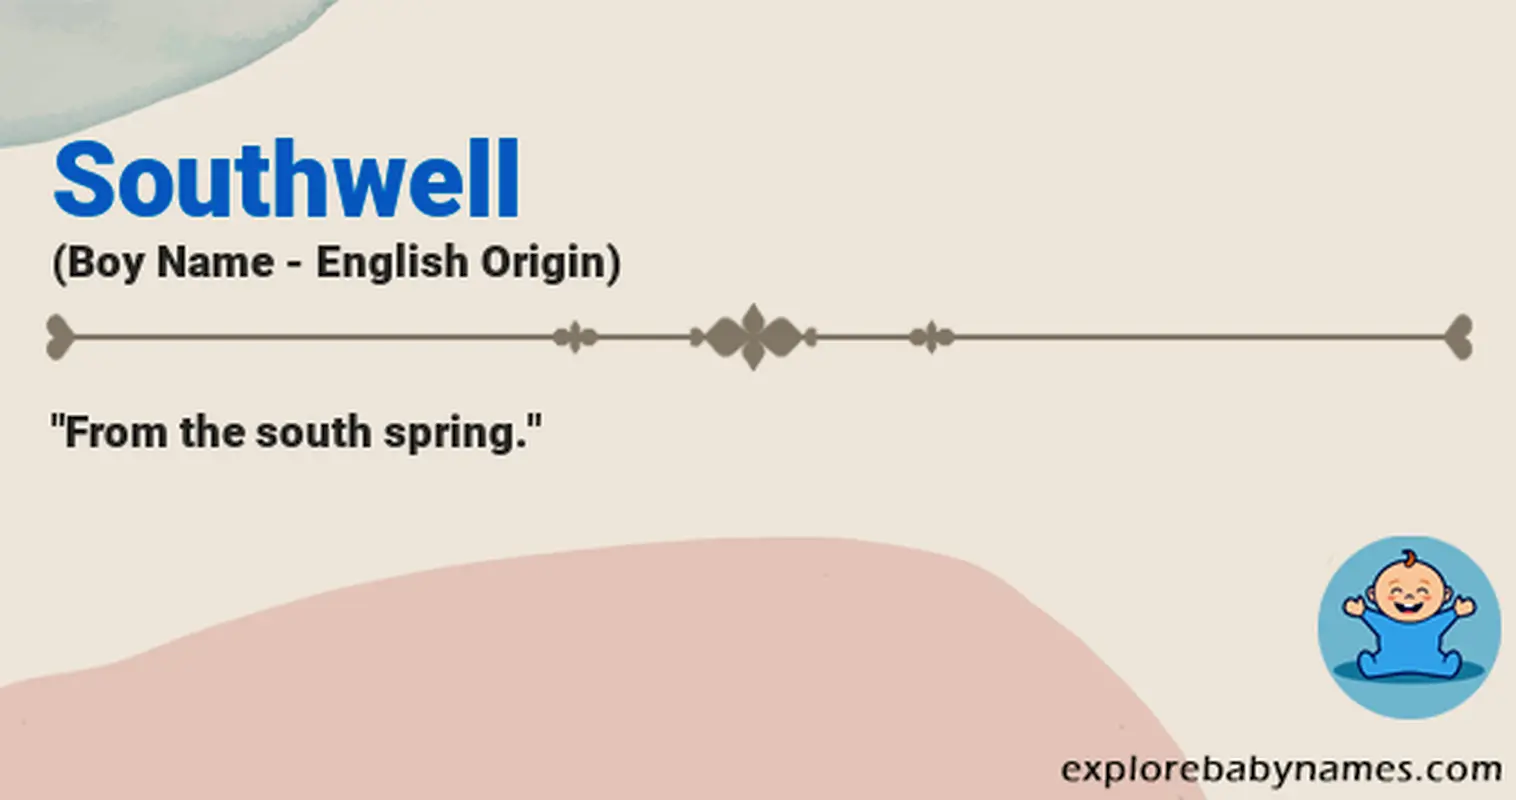 Meaning of Southwell